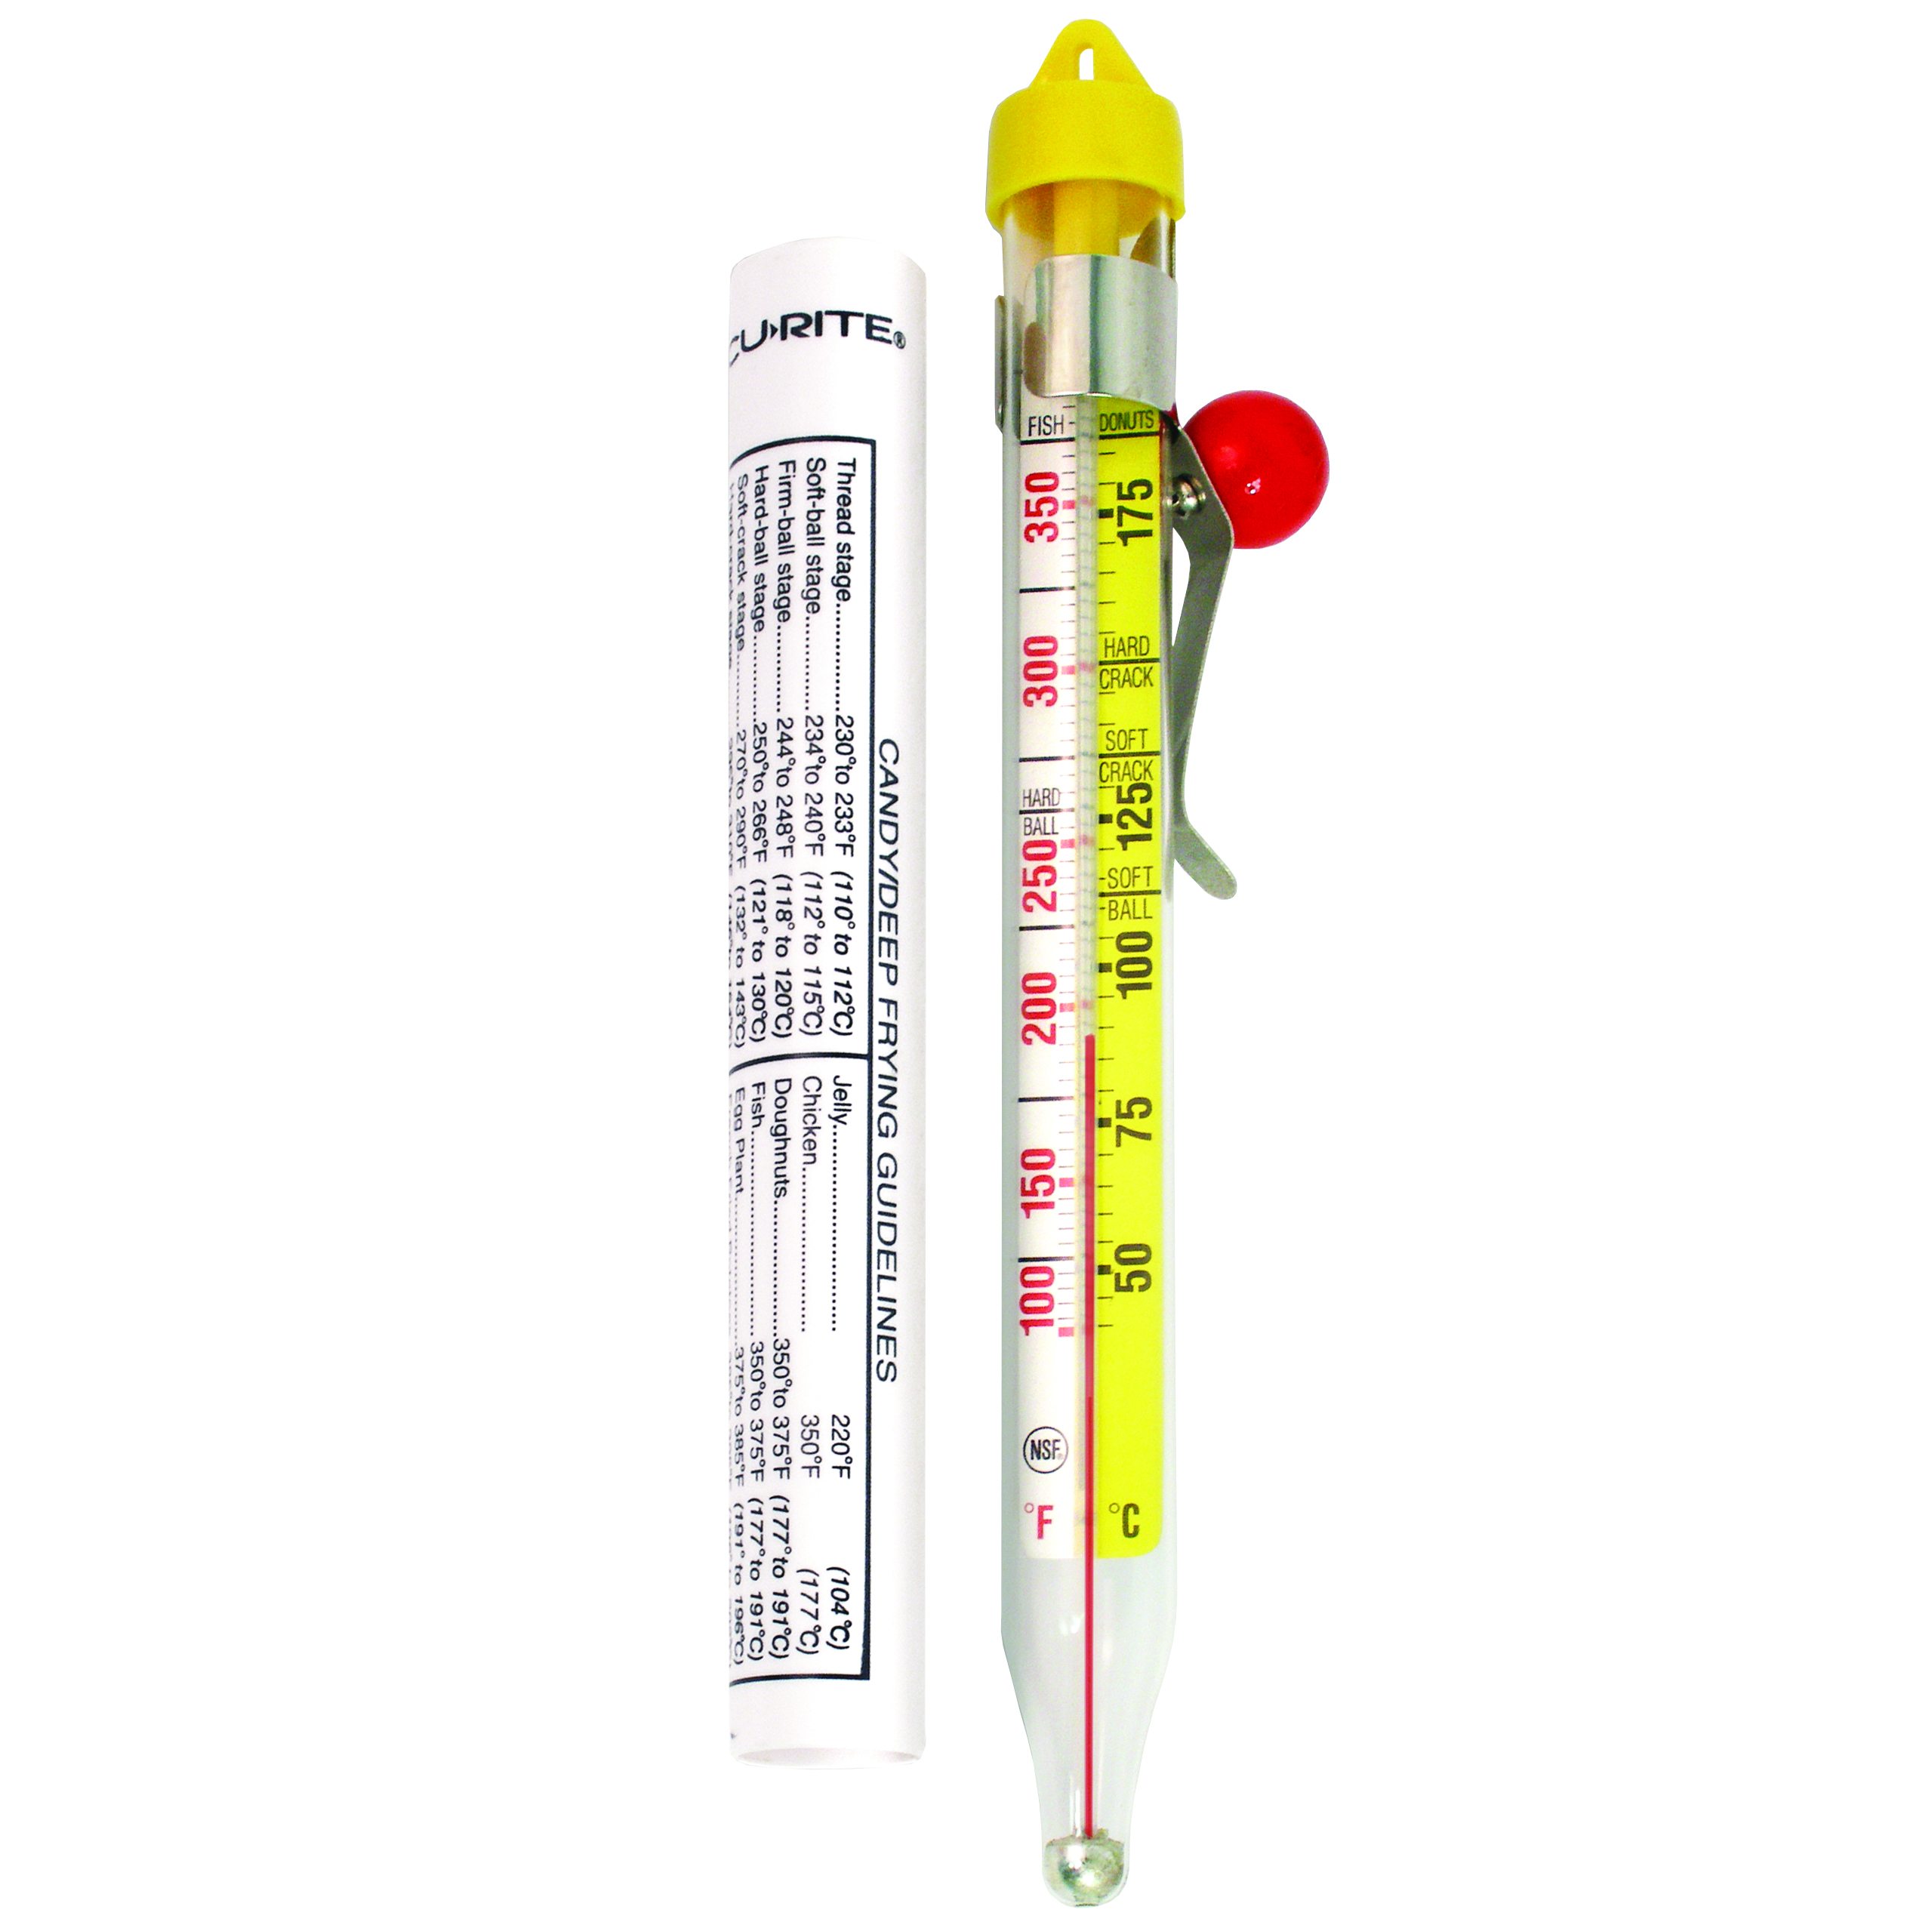 AcuRite cooking thermometer